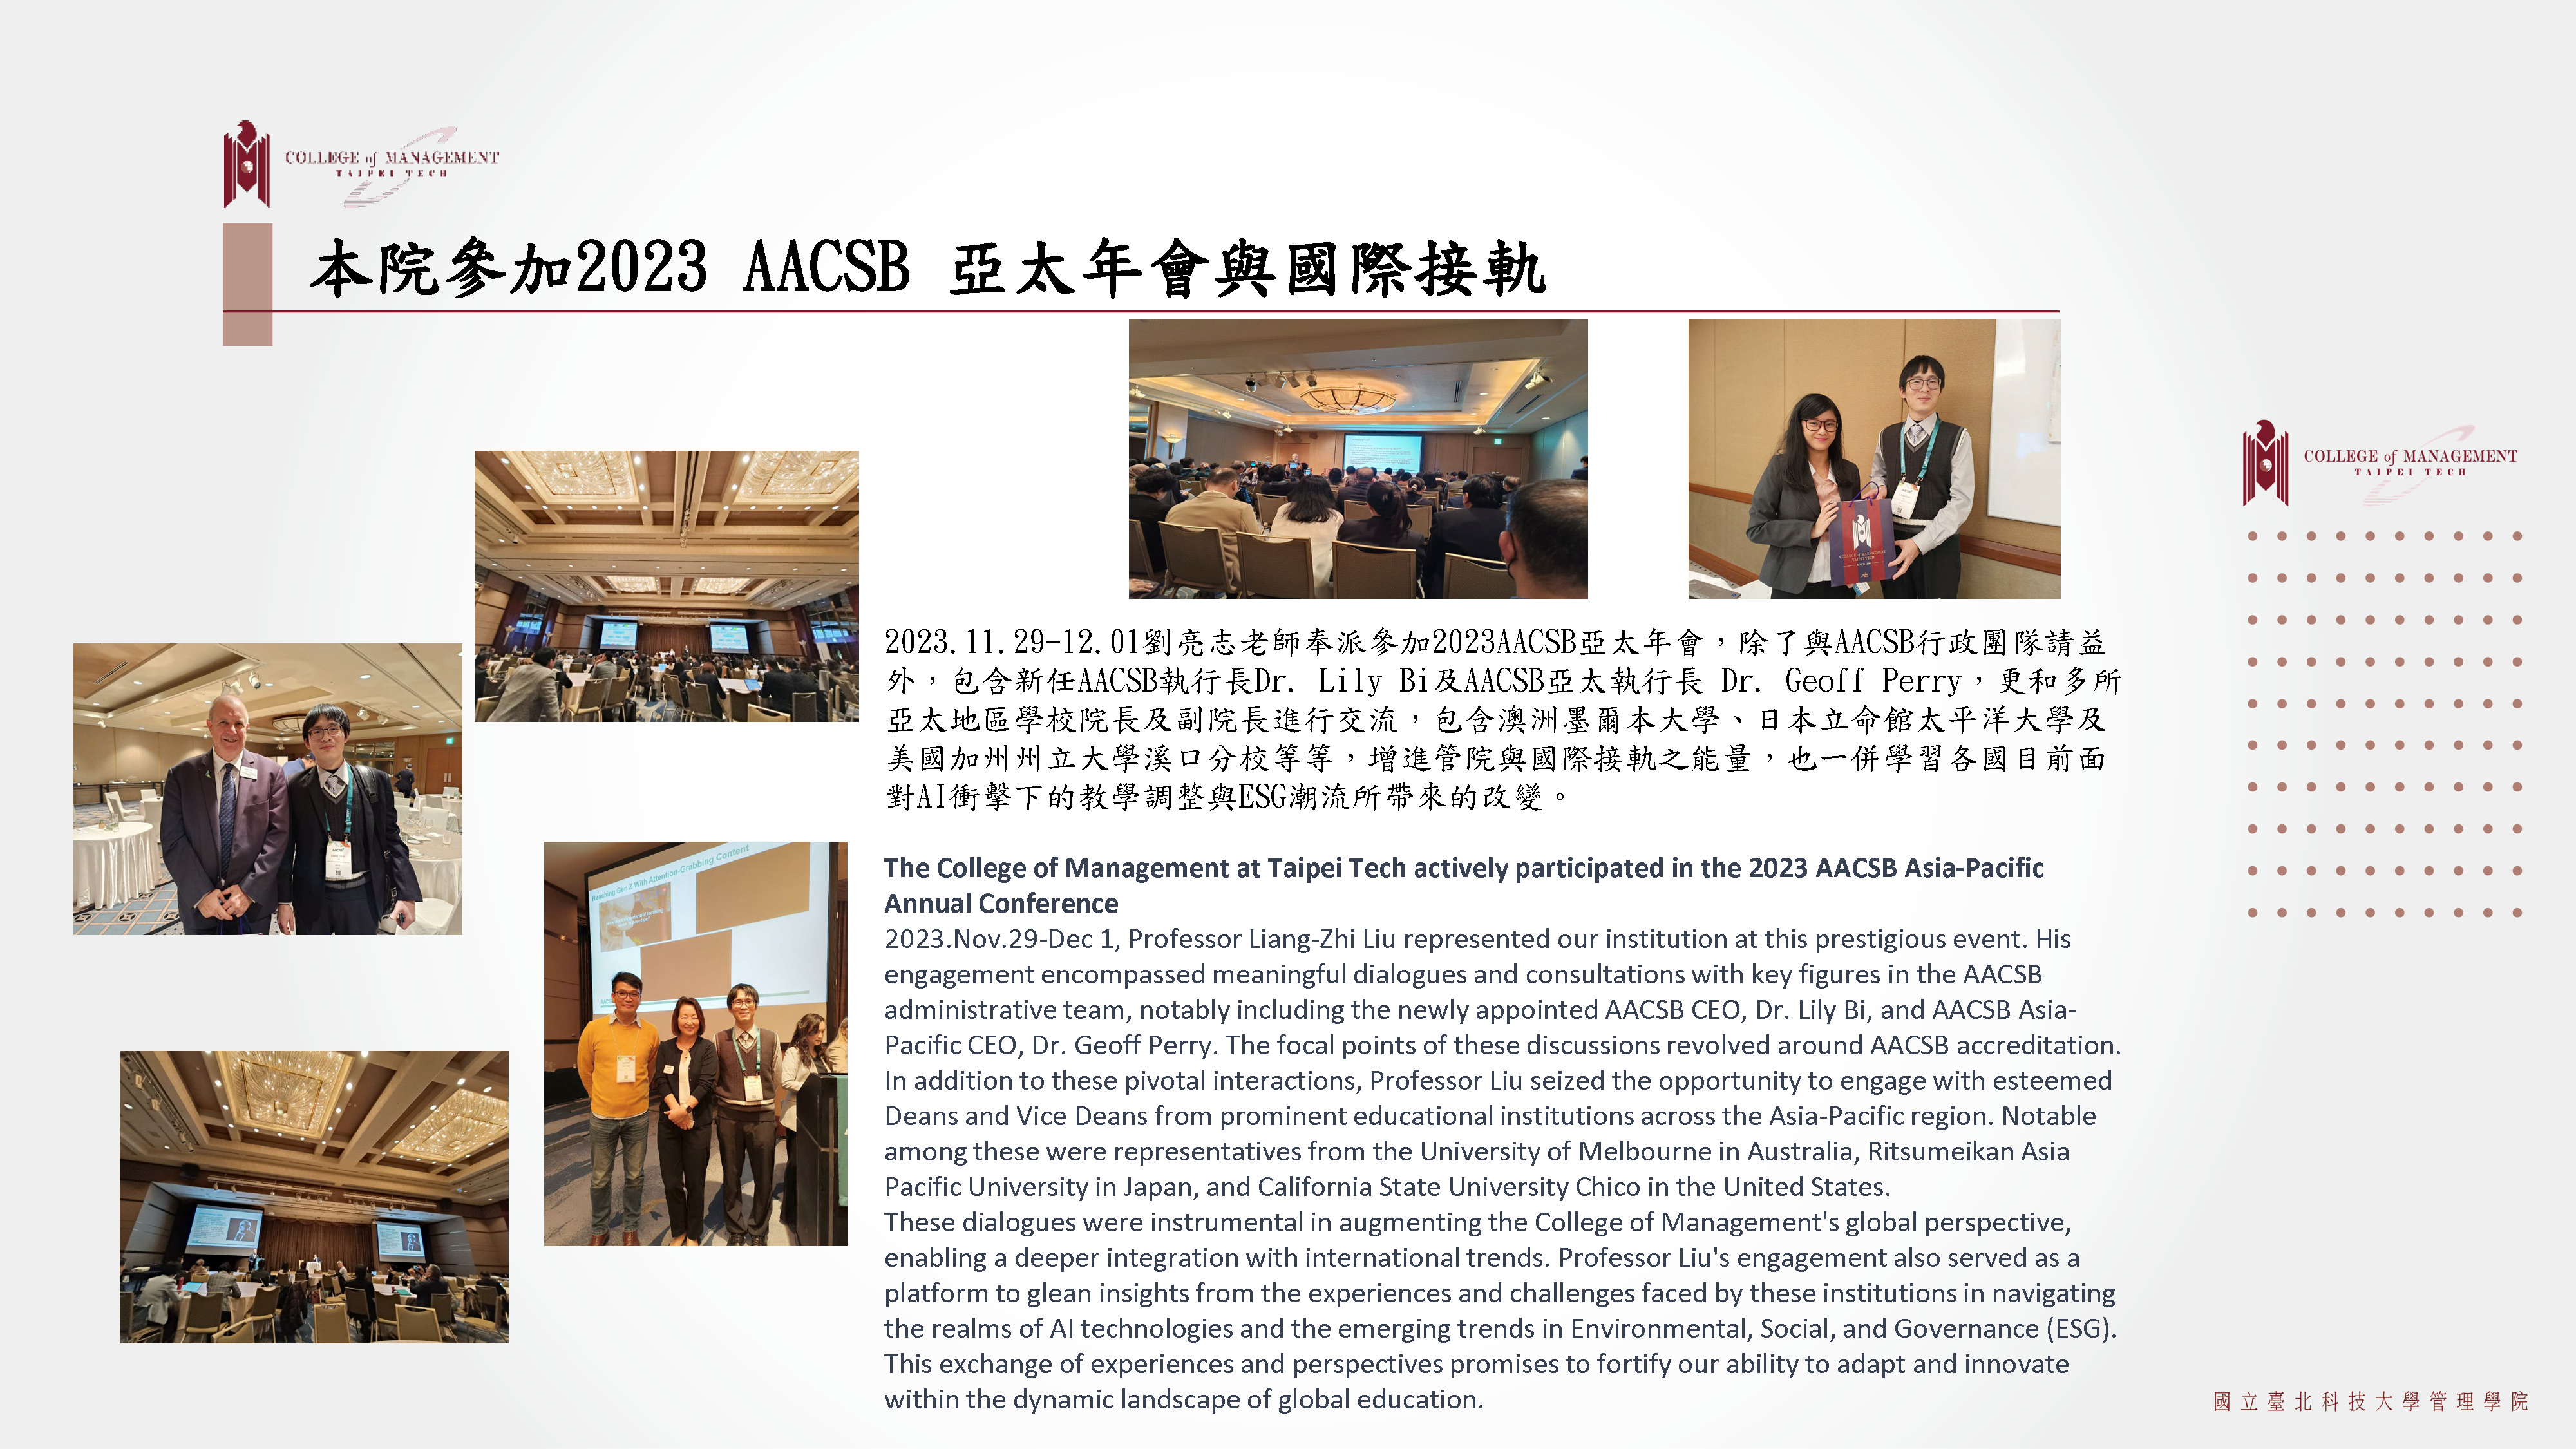 The College of Management at Taipei Tech actively participated in the 2023 AACSB Asia-Pacific Annual Conference